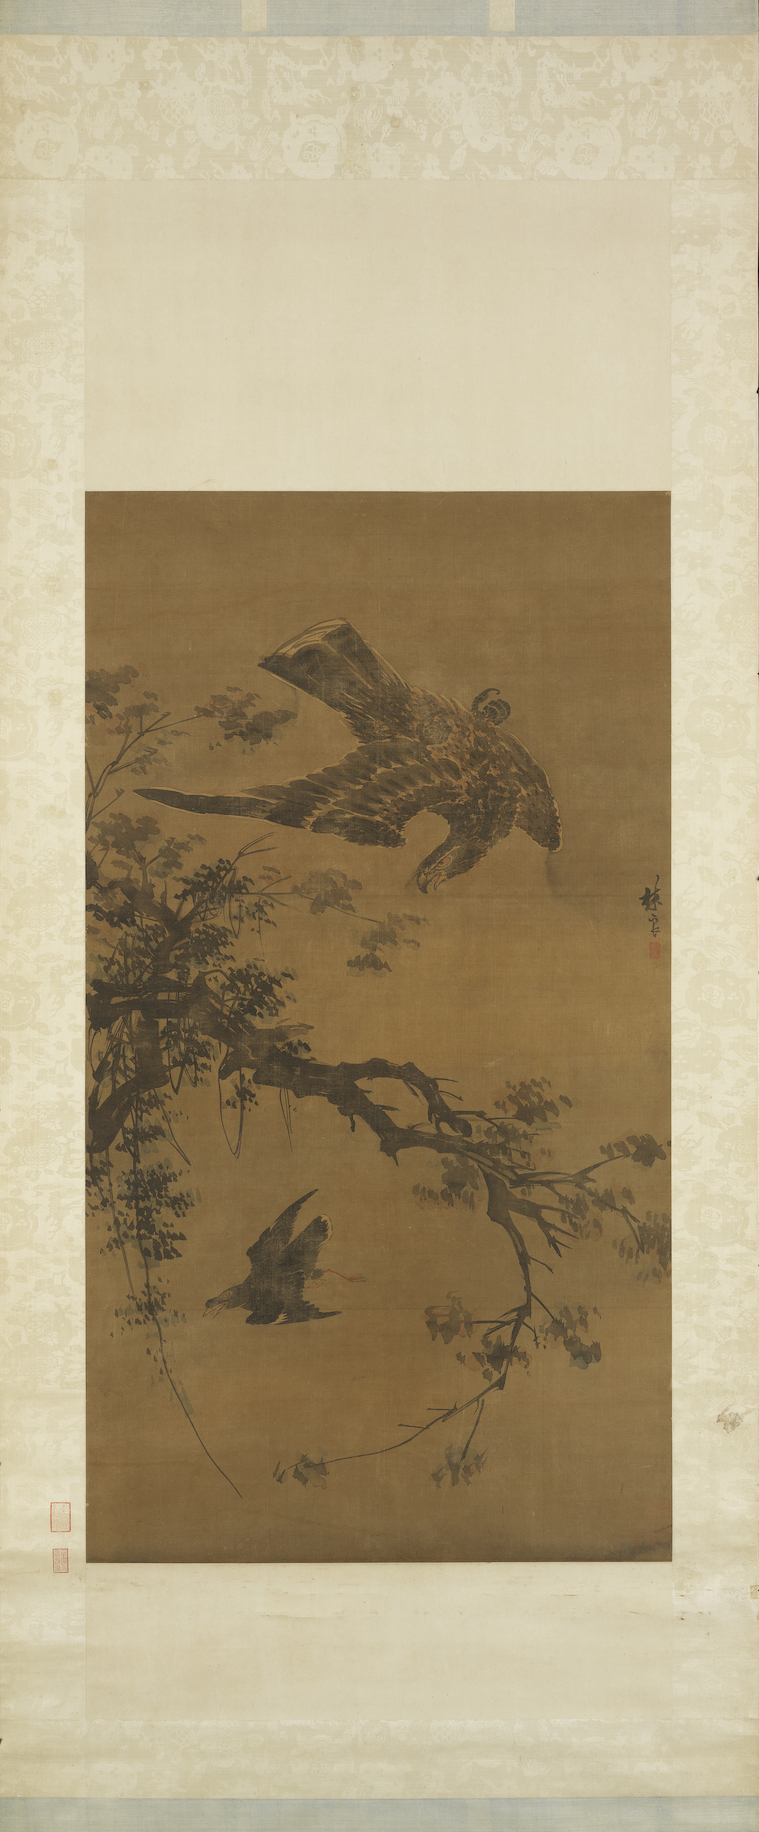 Lin Liang 林良 (ca. 1416-1480), Autumn Hawk. Hanging scroll, ink and color on silk, 136.8 x 74.8 cm. National Palace Museum, Taipei